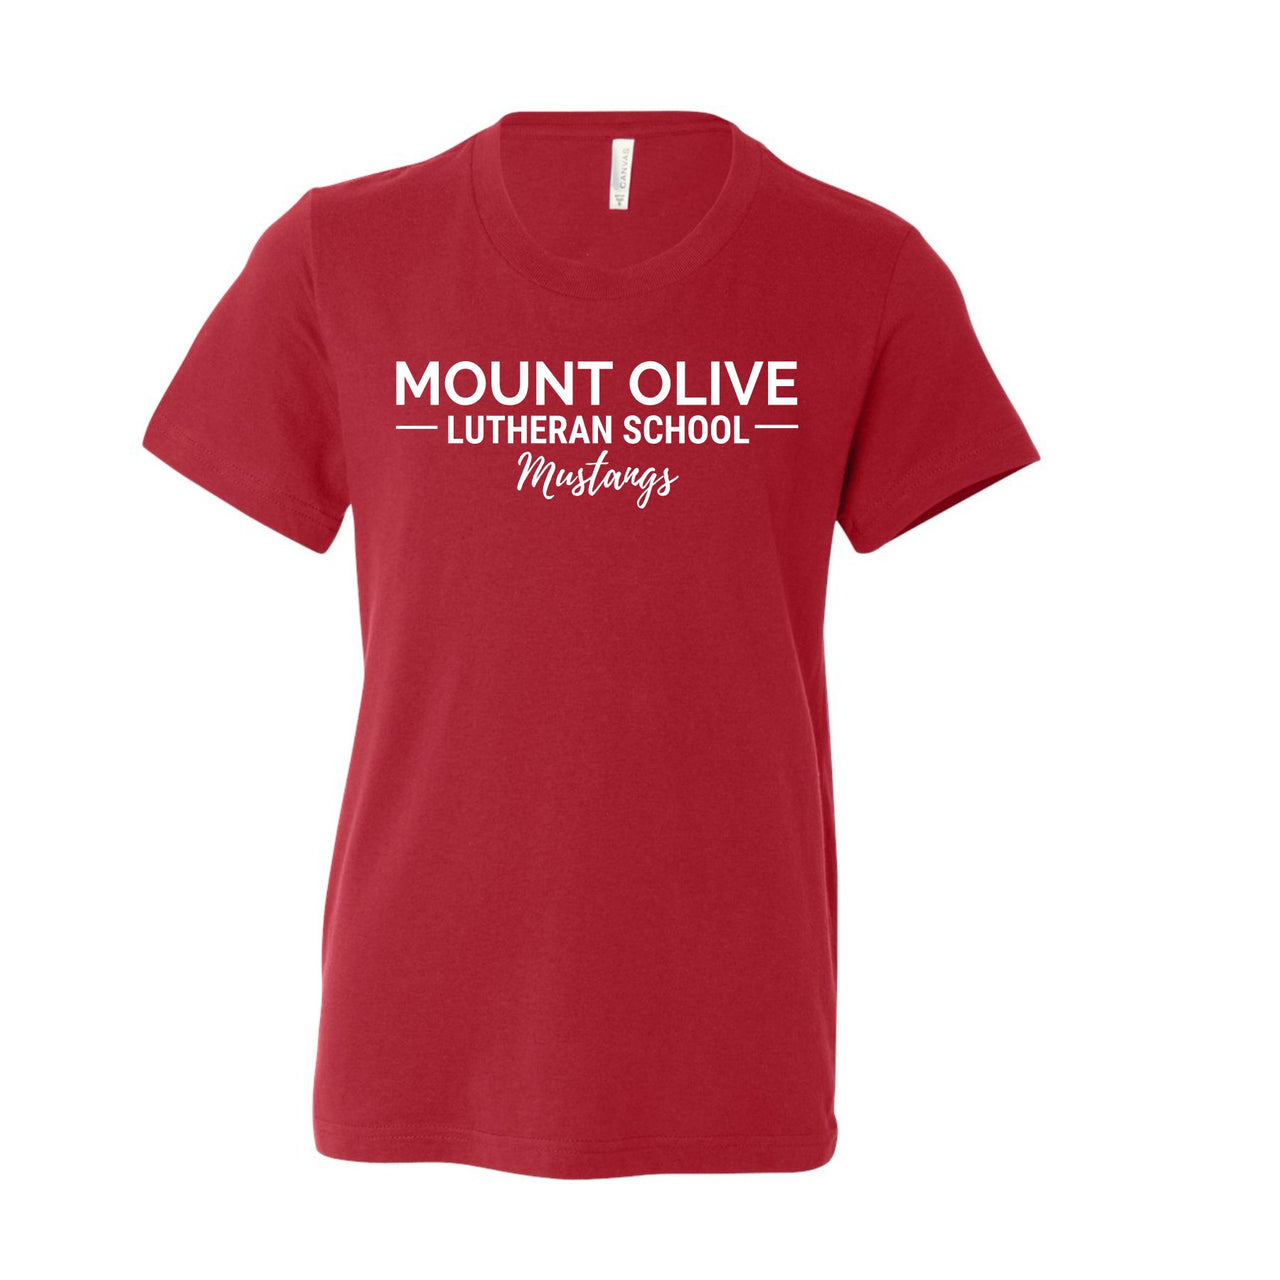 Youth - Unisex Tee (Mount Olive Lutheran)